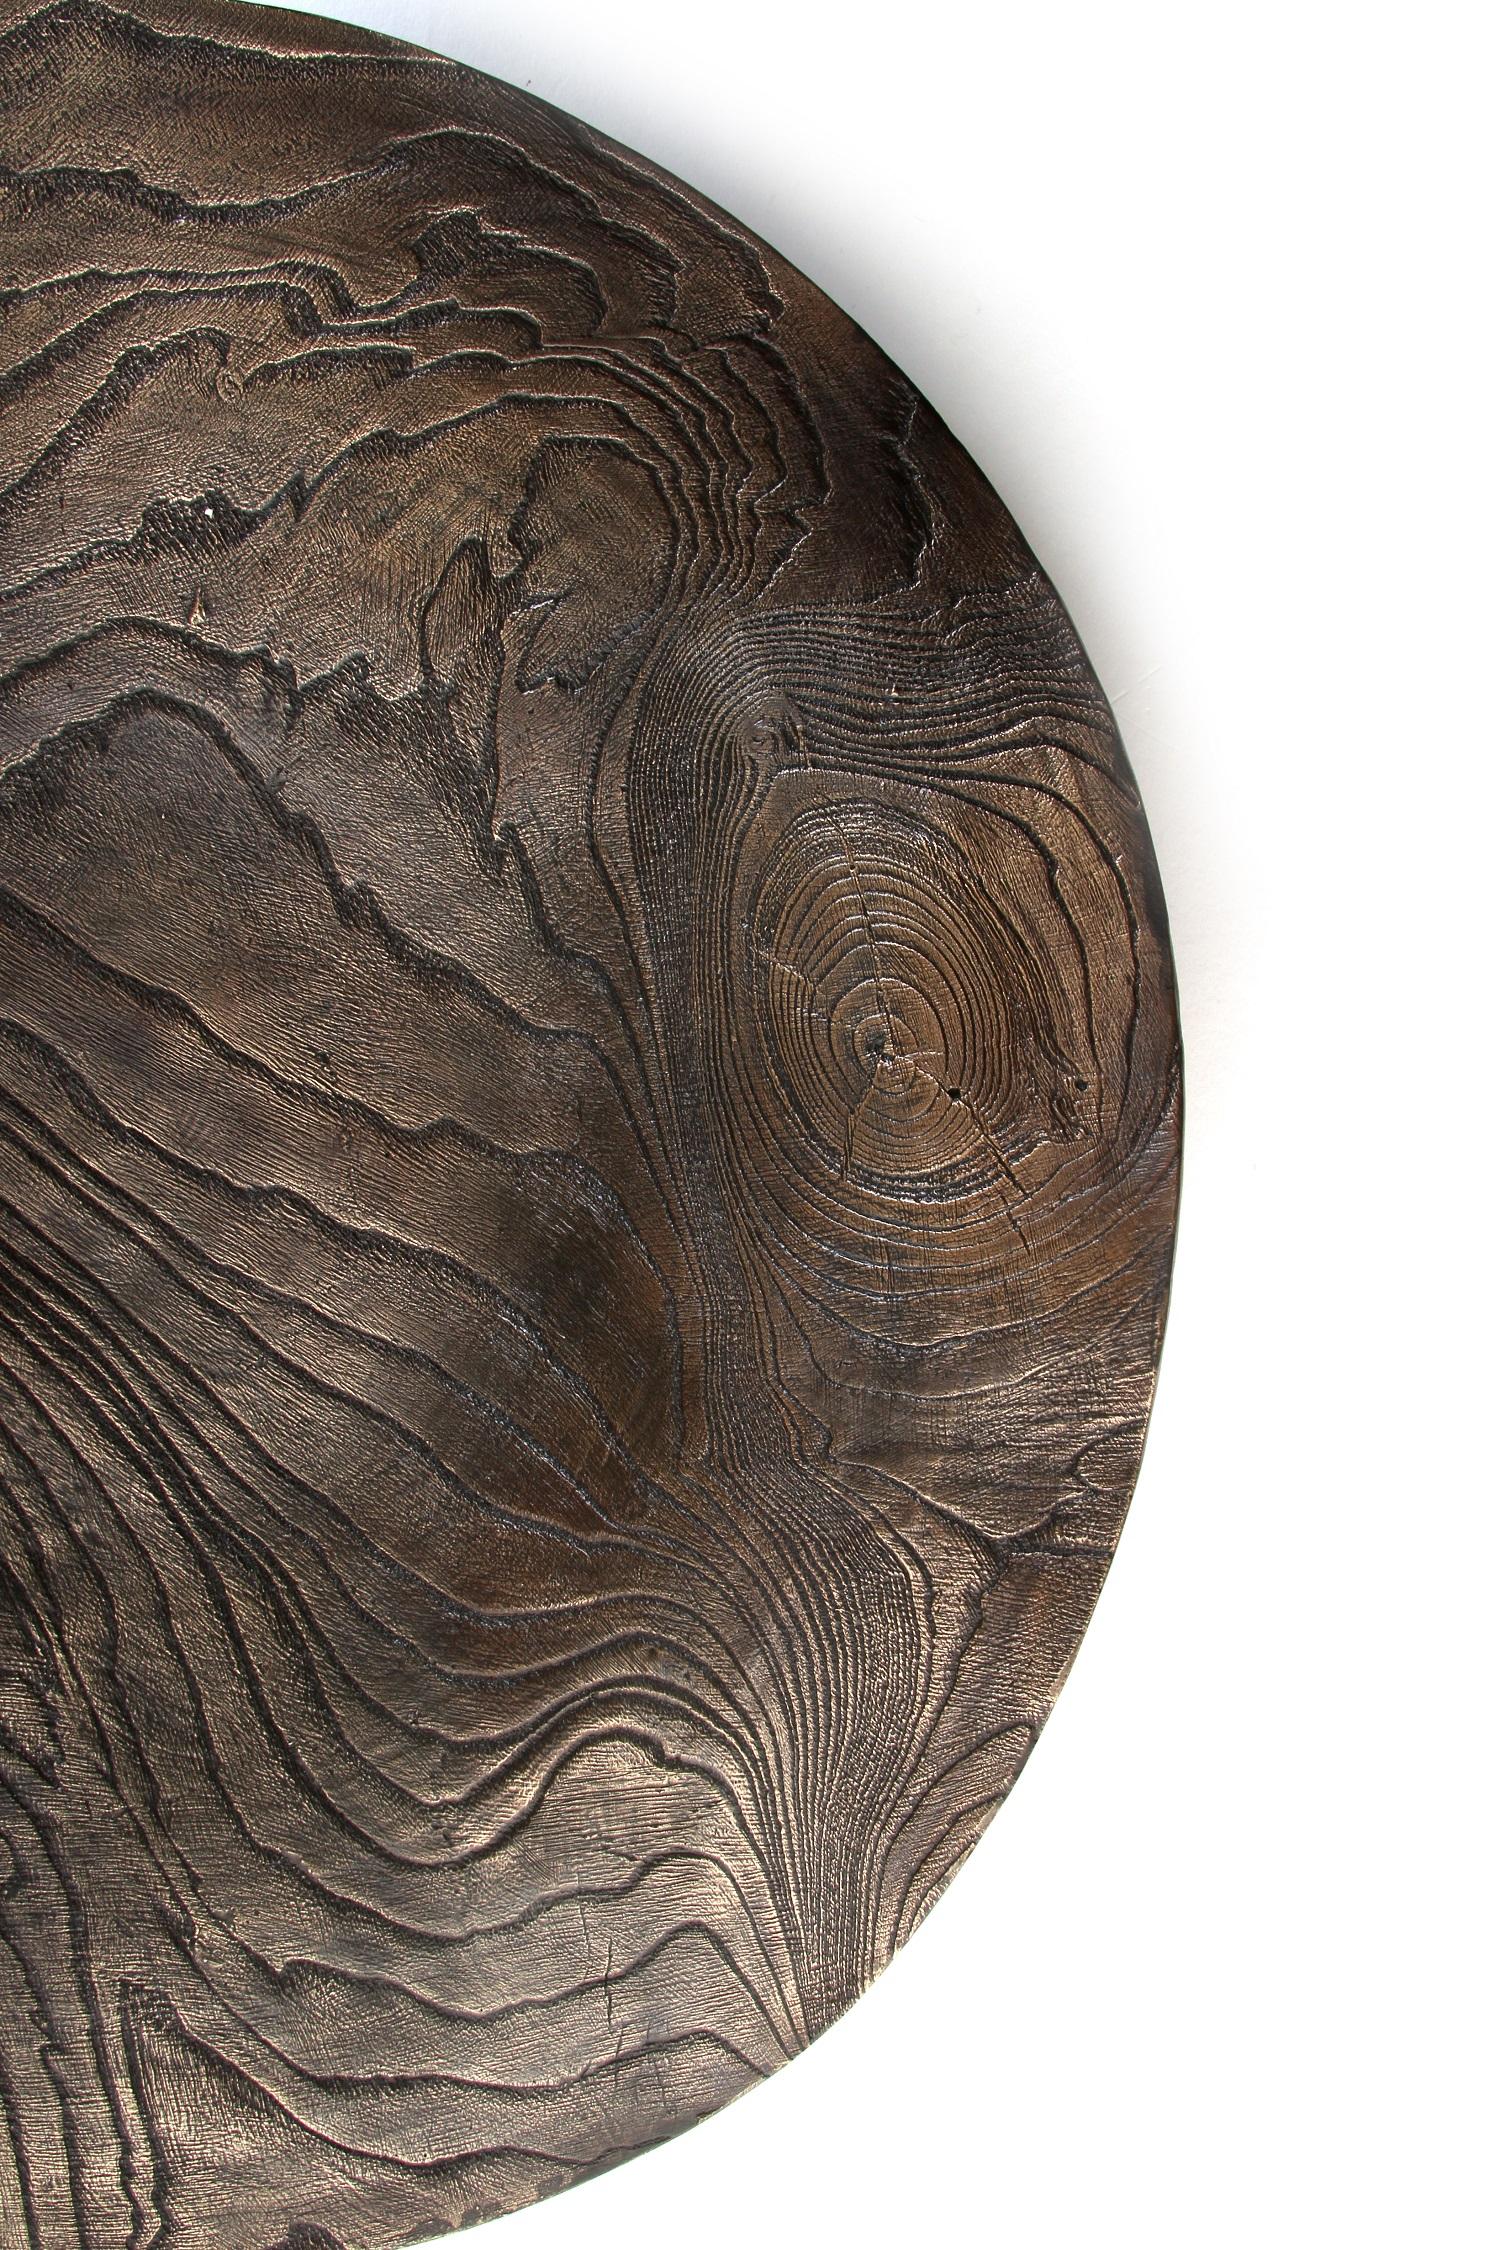 Solid Bronze ‘Willow Platter’ or Dish with Wood Texture and Blackened Patina im Zustand „Neu“ im Angebot in West Hollywood, CA